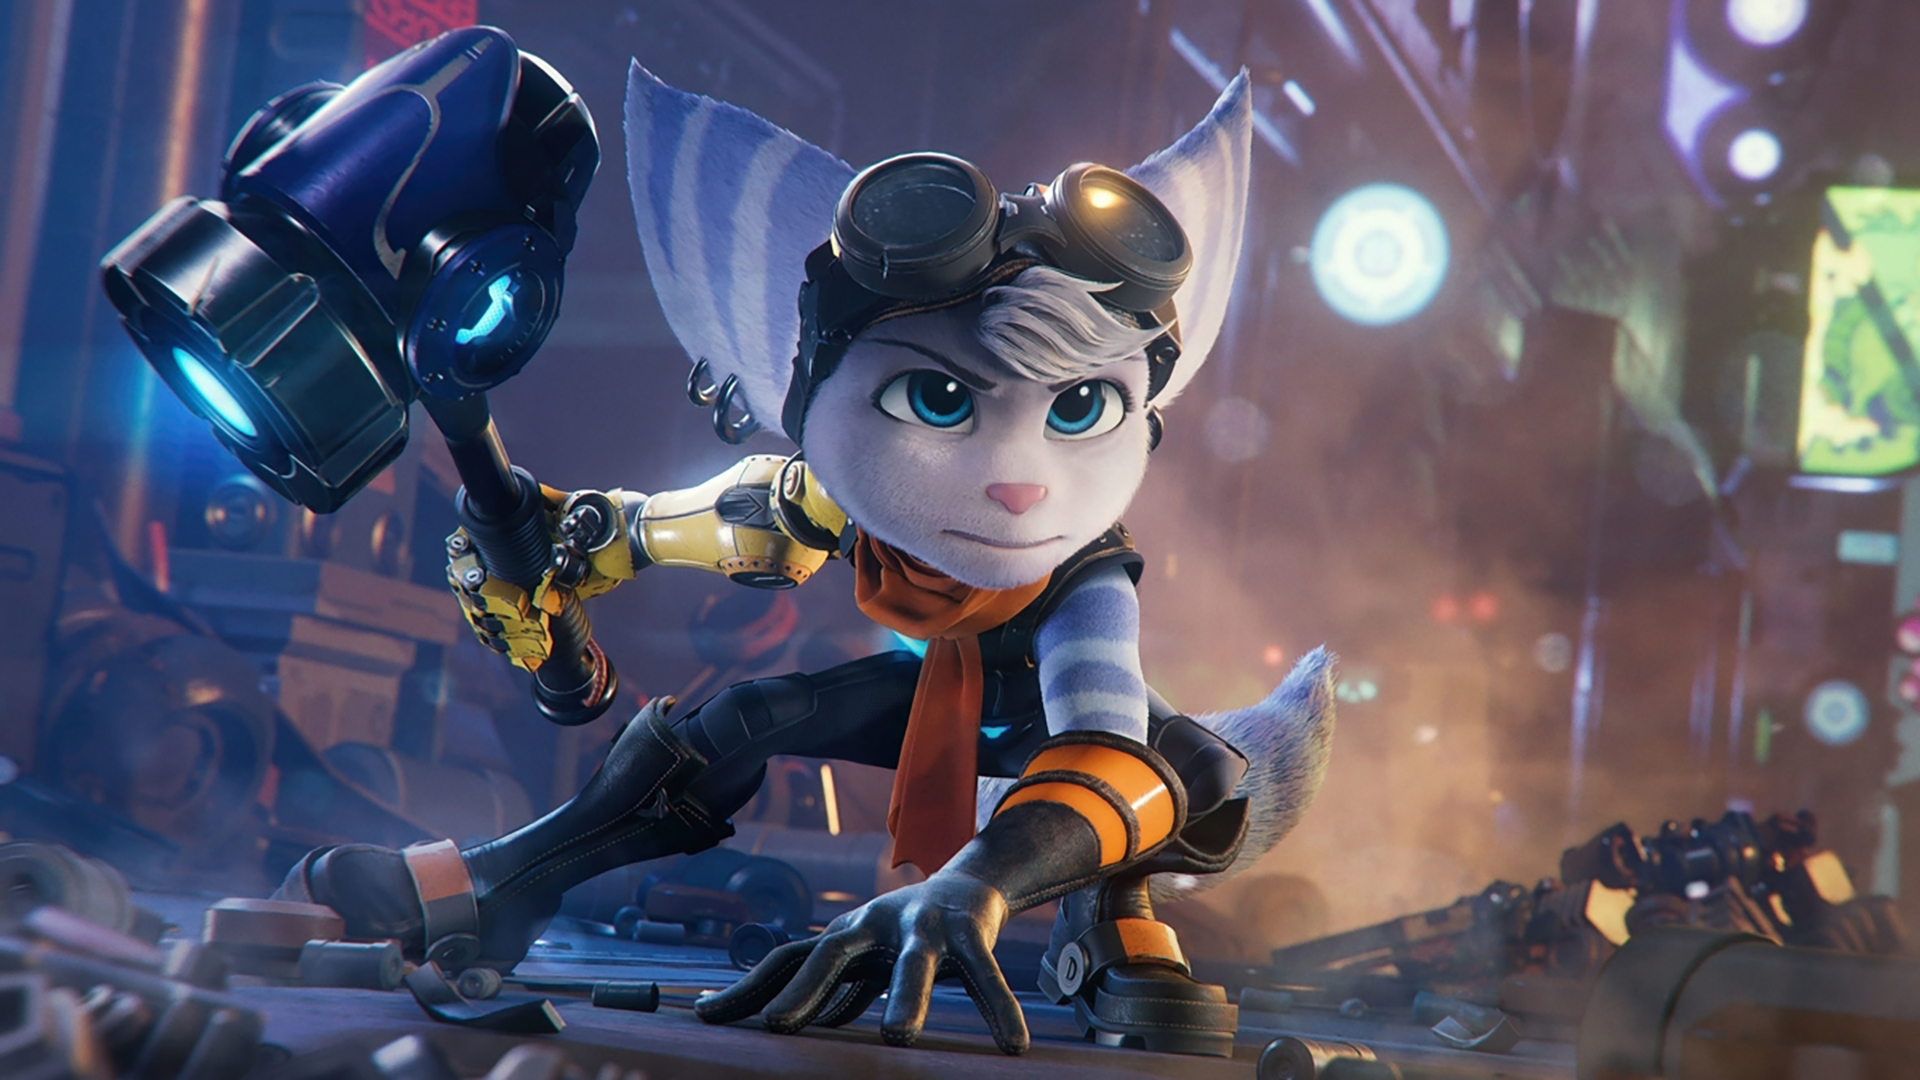 Rivet lands in front of enemies in Ratchet and Clank: Rift Apart